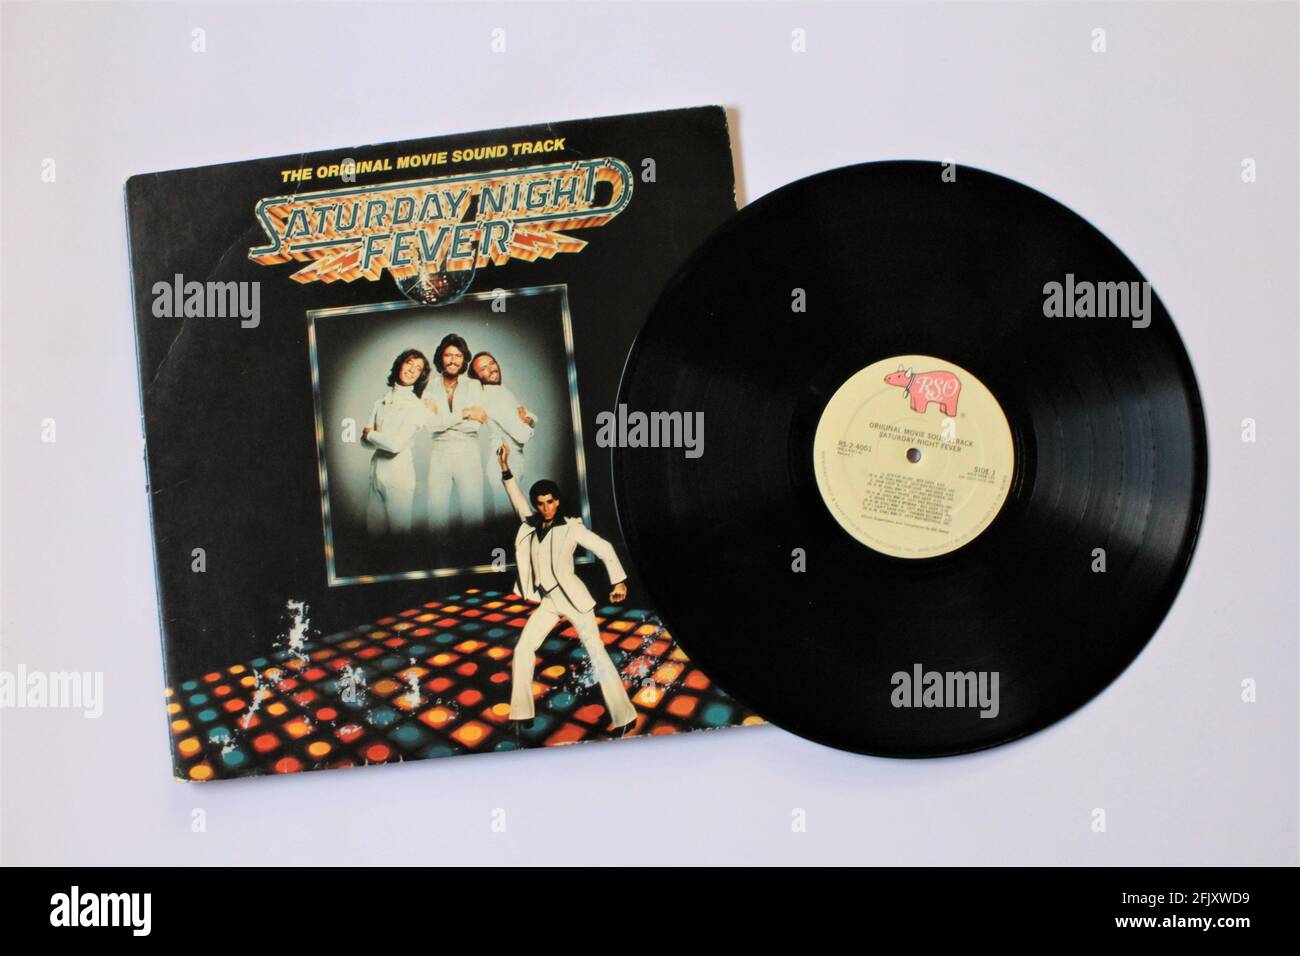 Saturday Night Fever is the soundtrack album from the 1977 film starring John Travolta featuring music from the Bee Gees. Disco and soul music Stock Photo